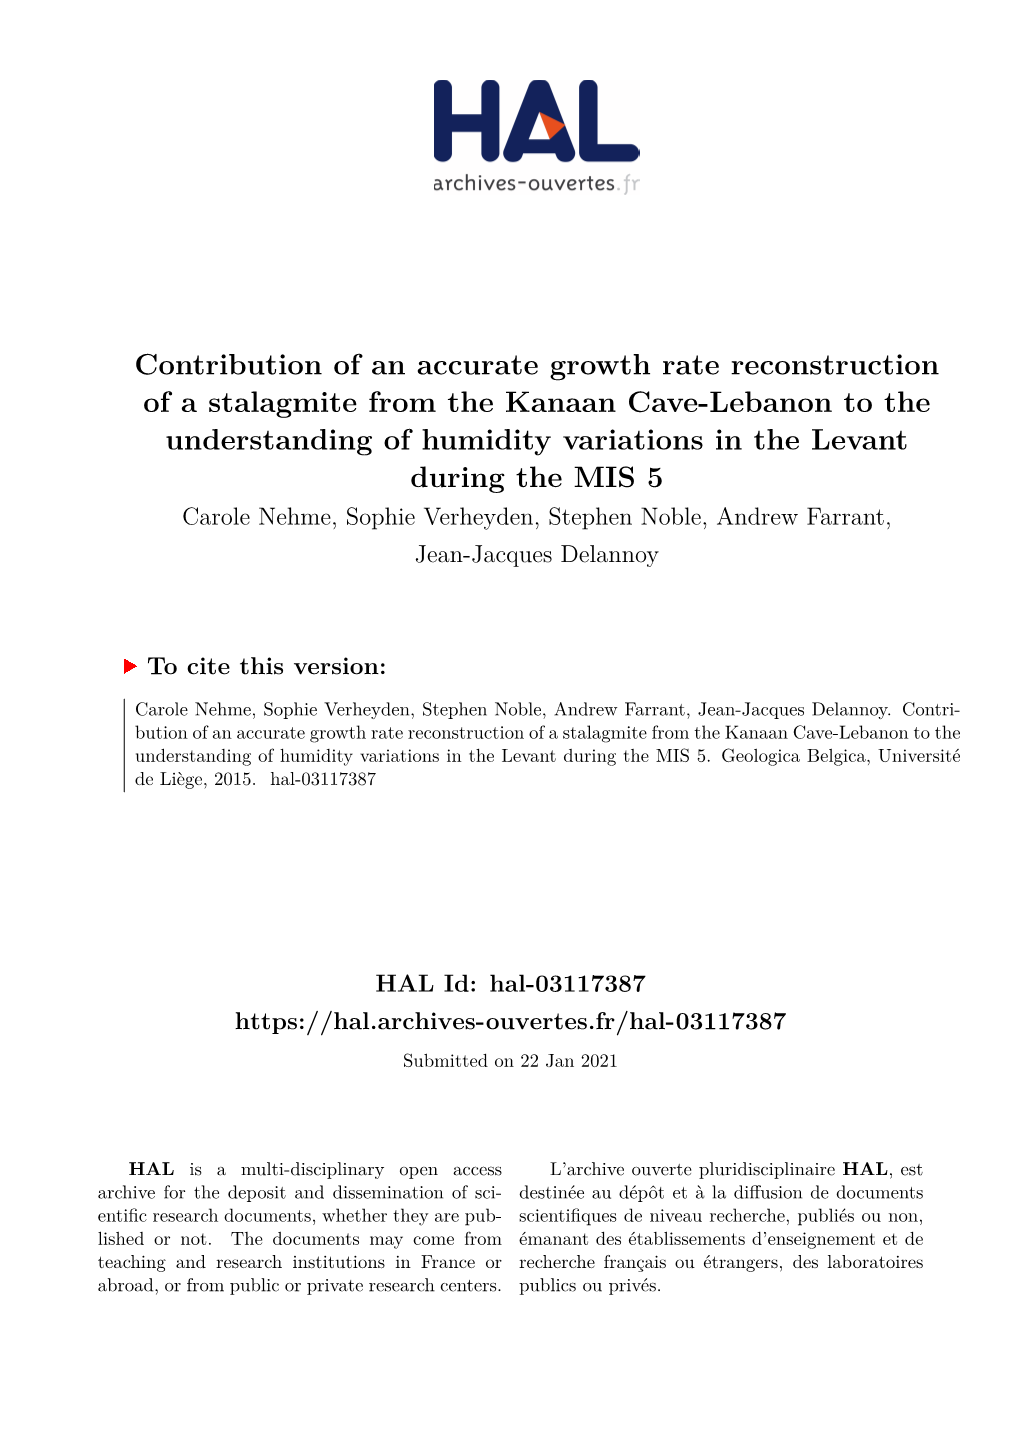 Contribution of an Accurate Growth Rate Reconstruction of a Stalagmite from the Kanaan Cave-Lebanon to the Understanding of Humi